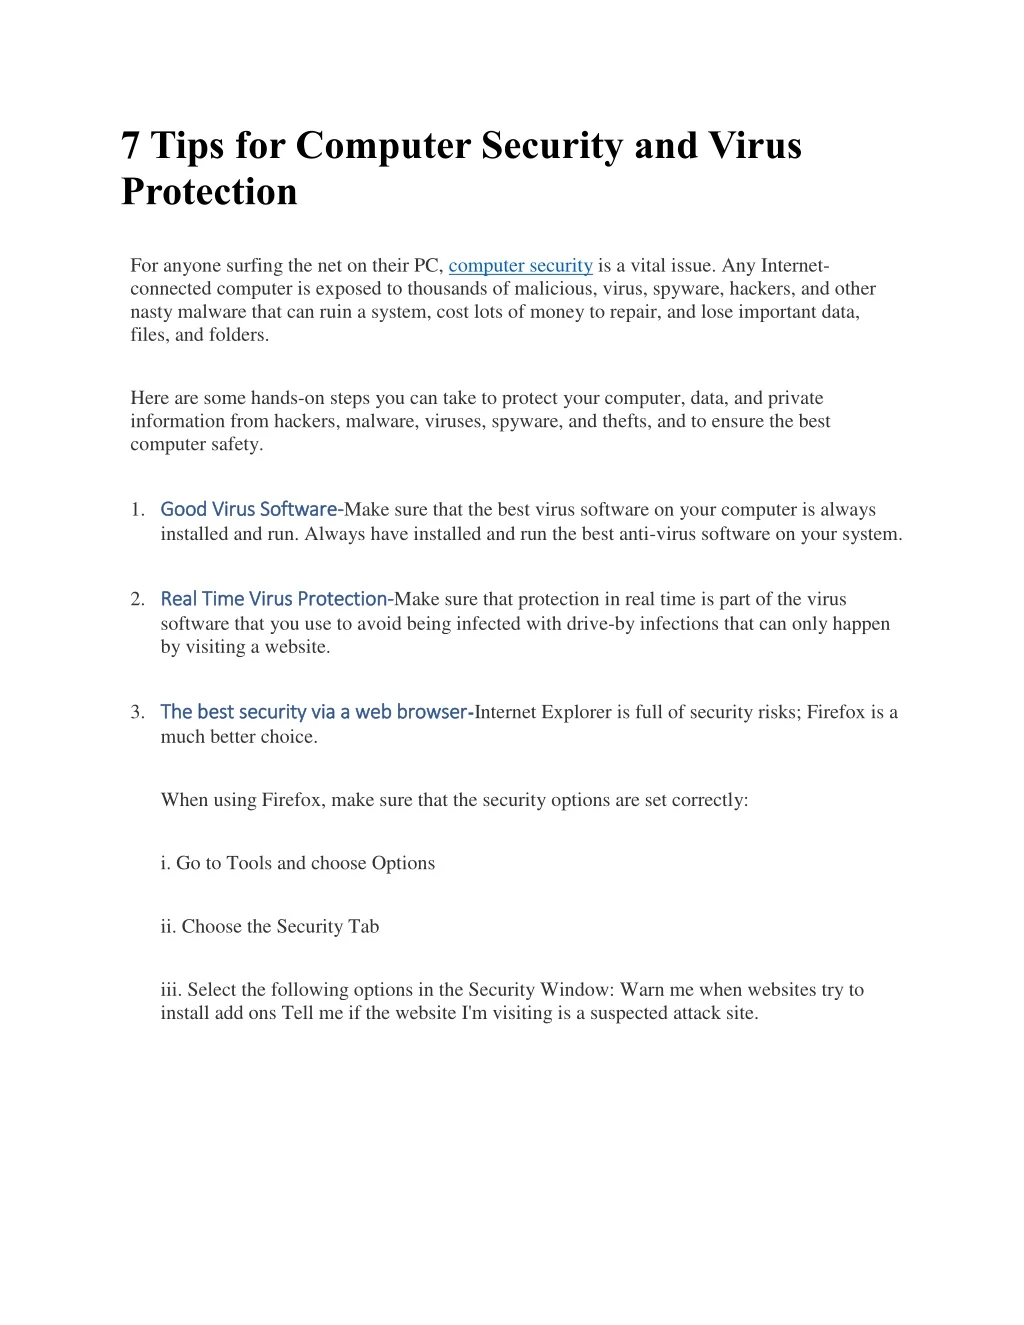 7 tips for computer security and virus protection